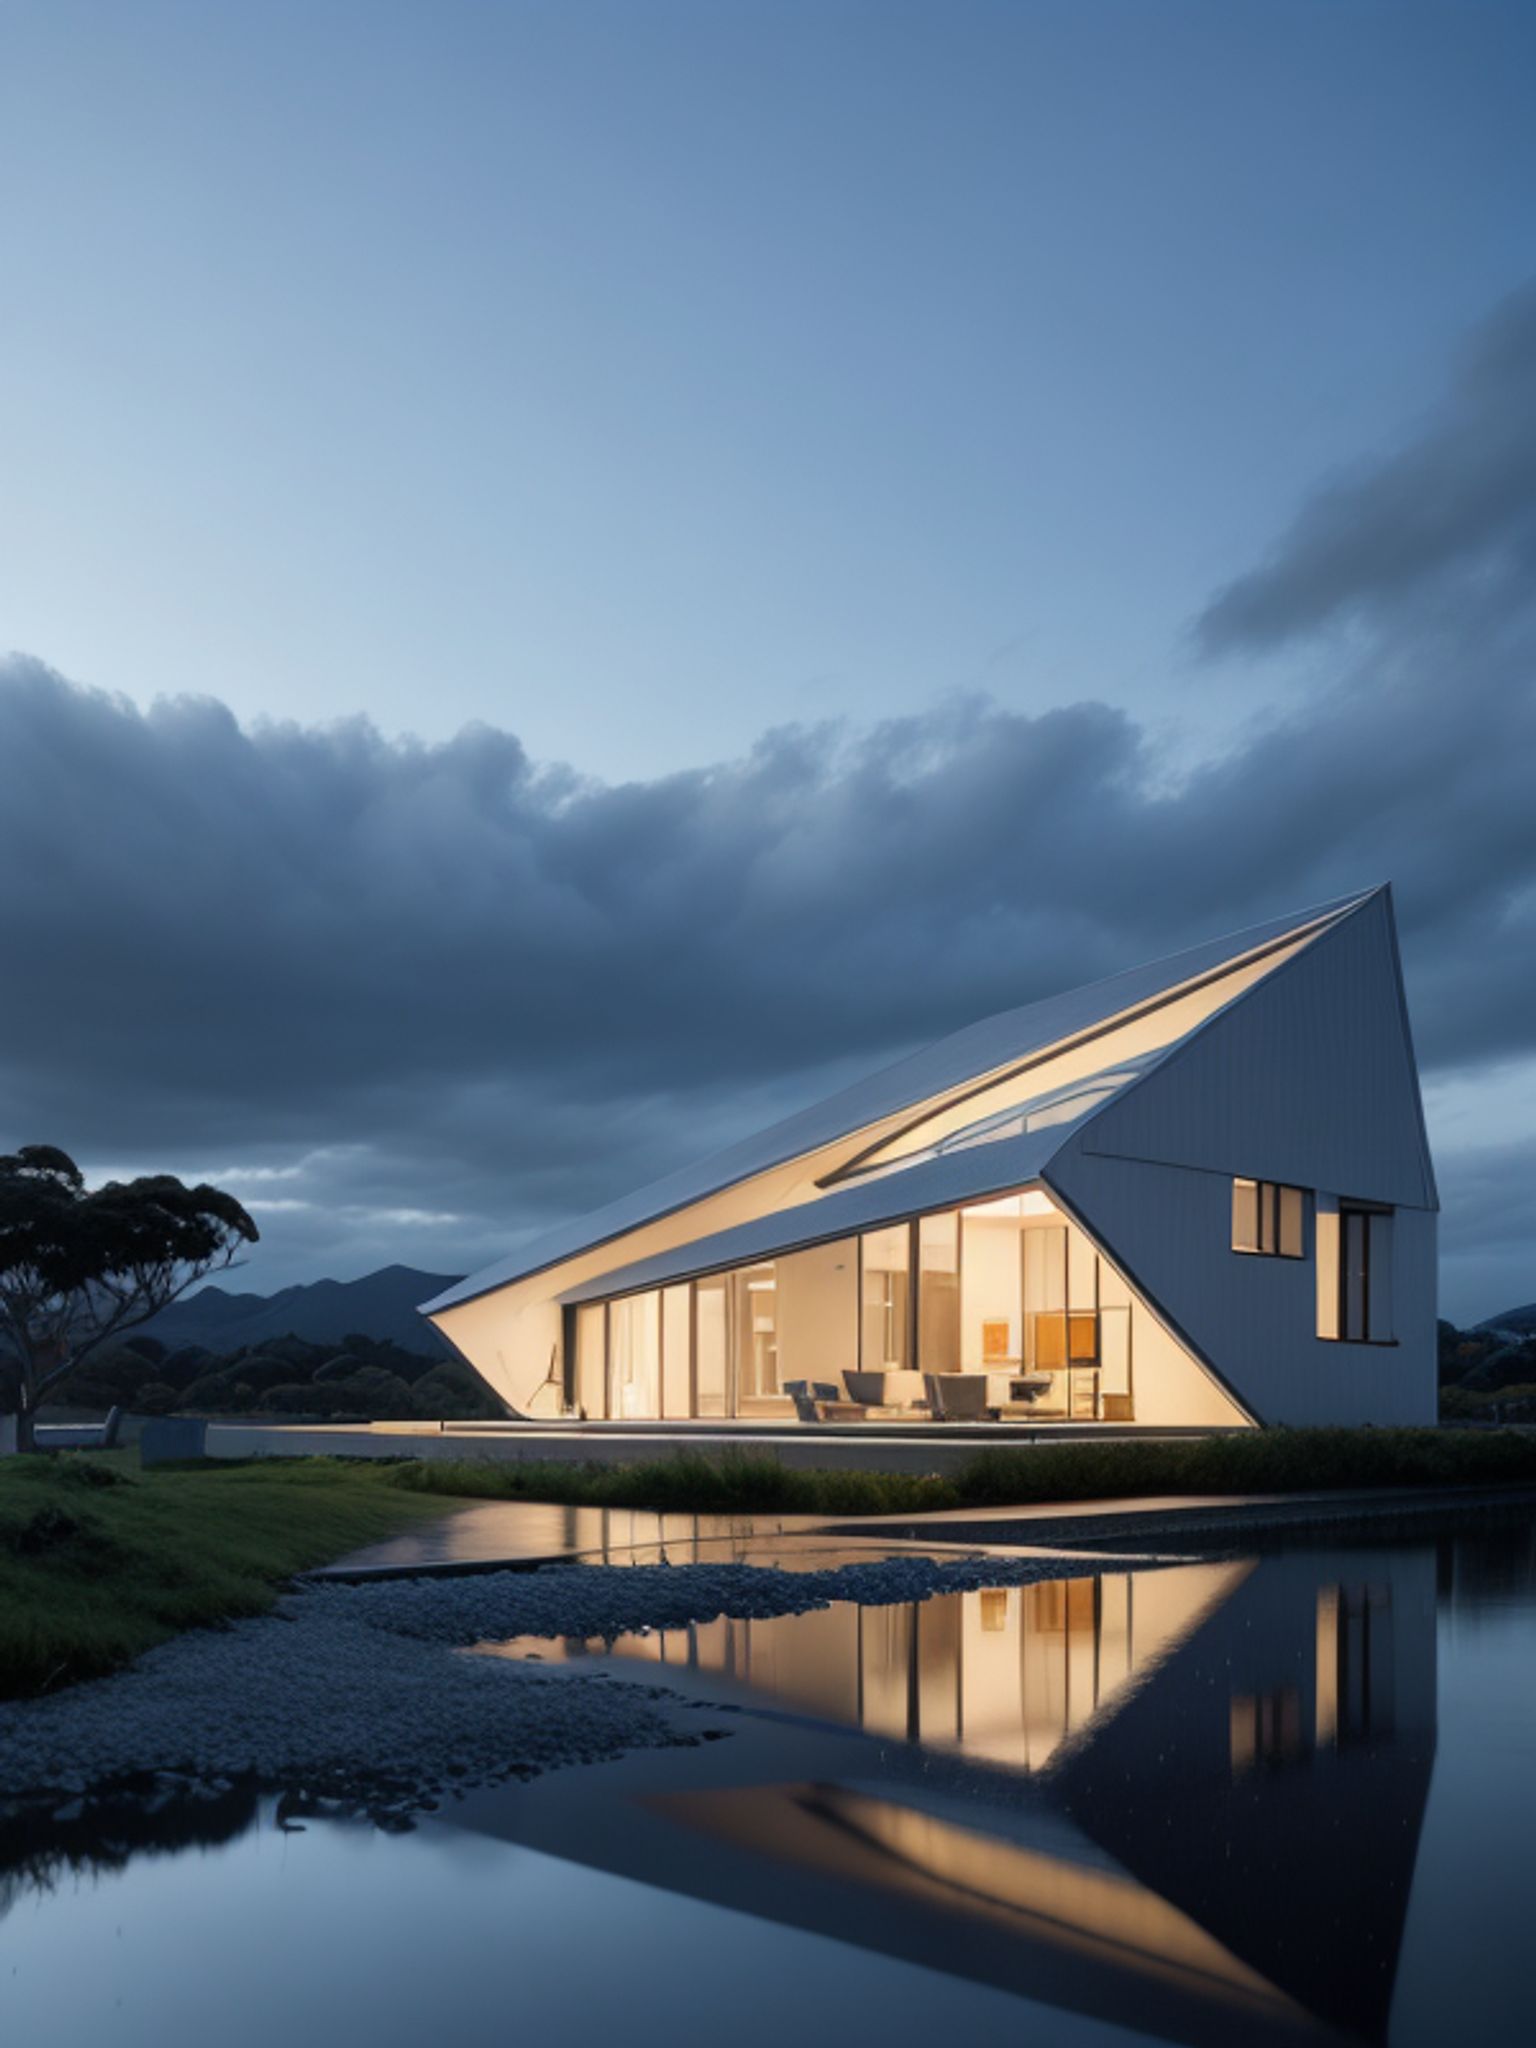 Floating-triangle-house-in-the-New-Zealand-post-hfso